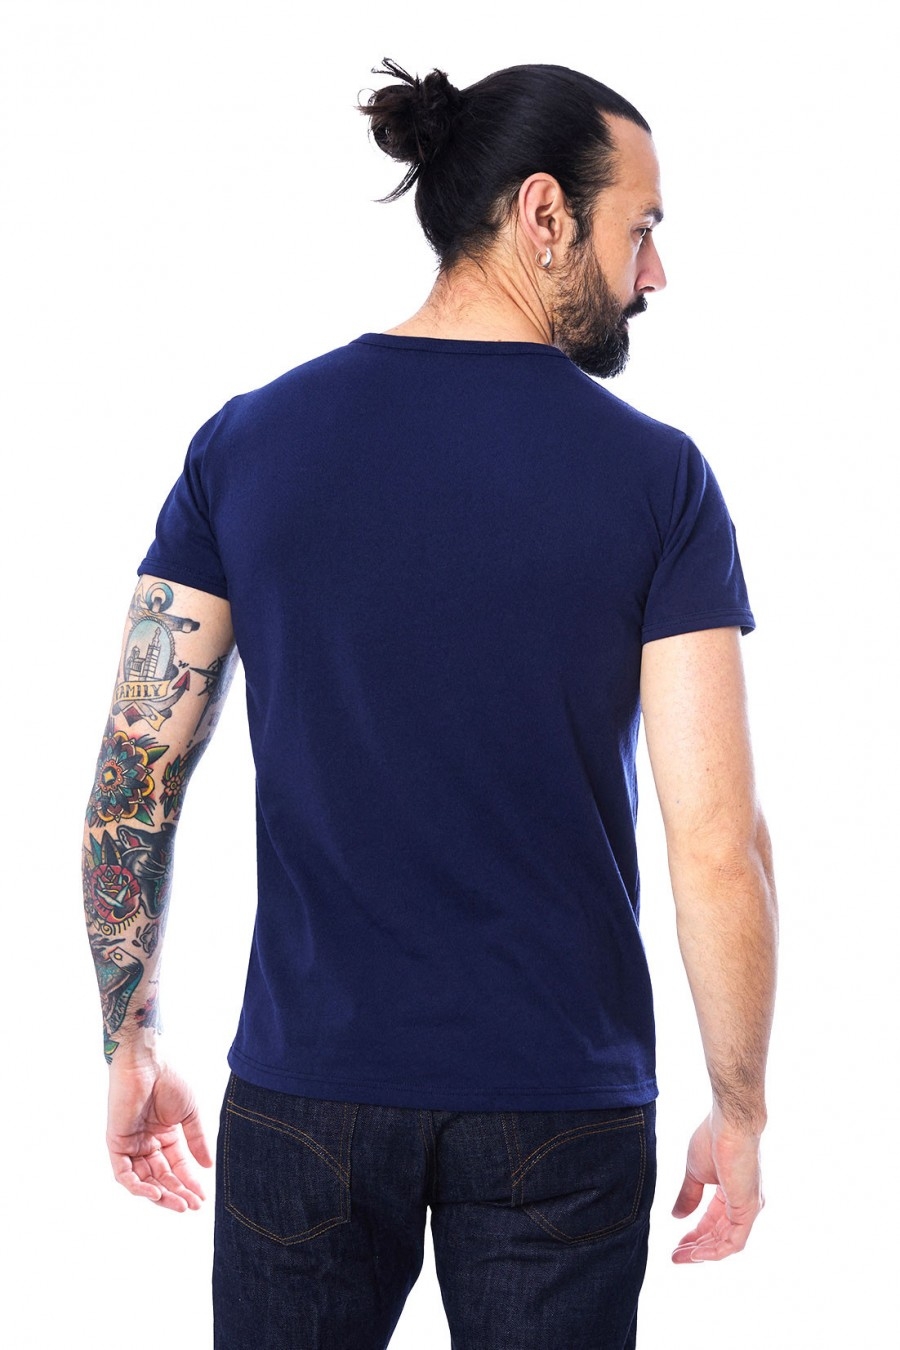 T-SHIRT HOMME MANCHE COURTE COL ROND BLEU ROI - Made in France & 100% Recyclé